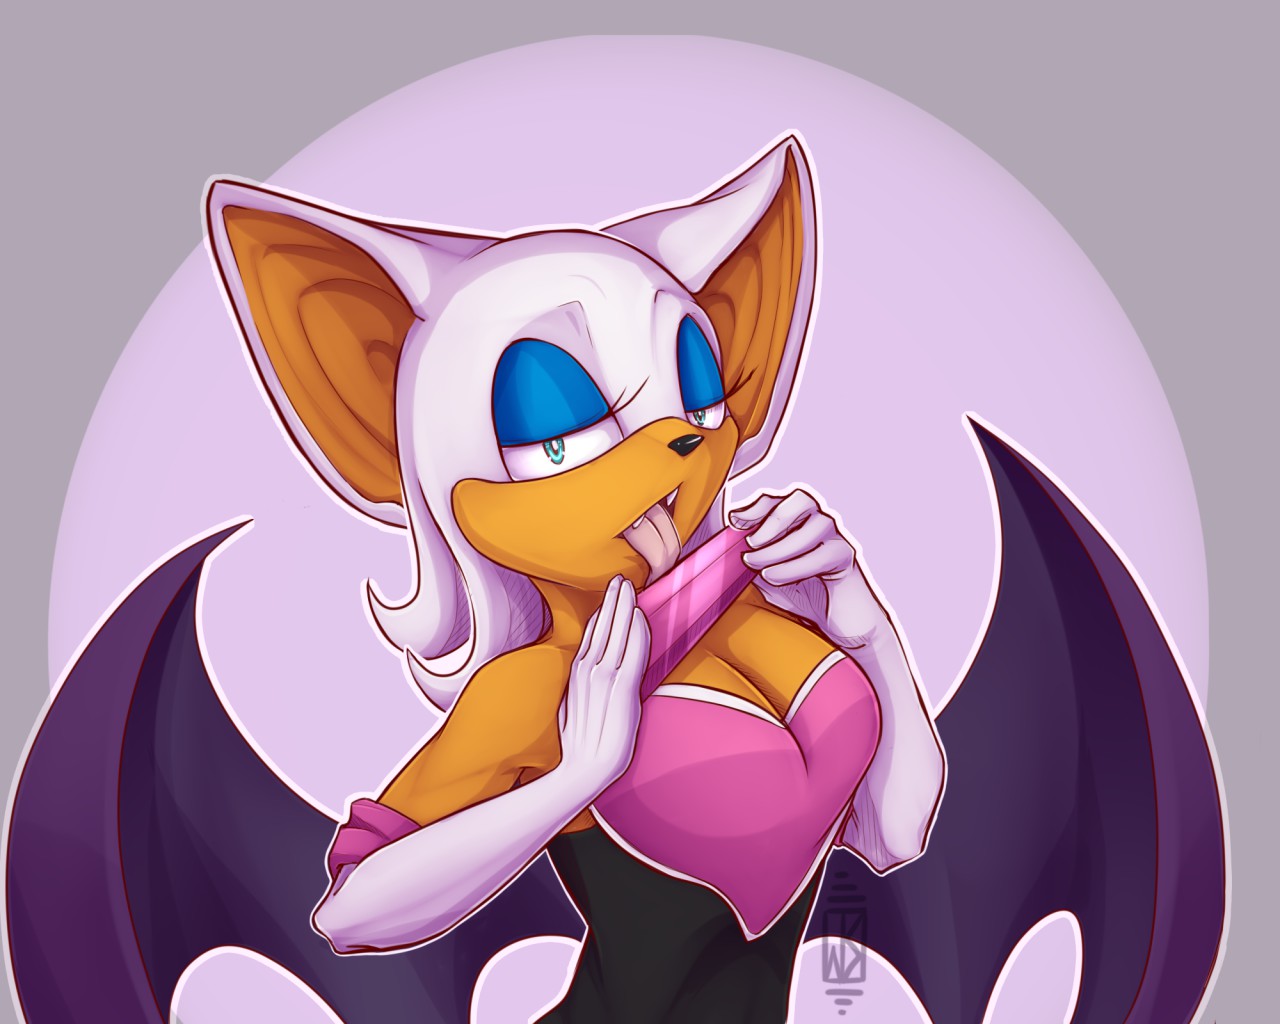 strp/rouge_the_bat_by_sunlight_010_by_runway010_ddcp51p-fullview.png?token....